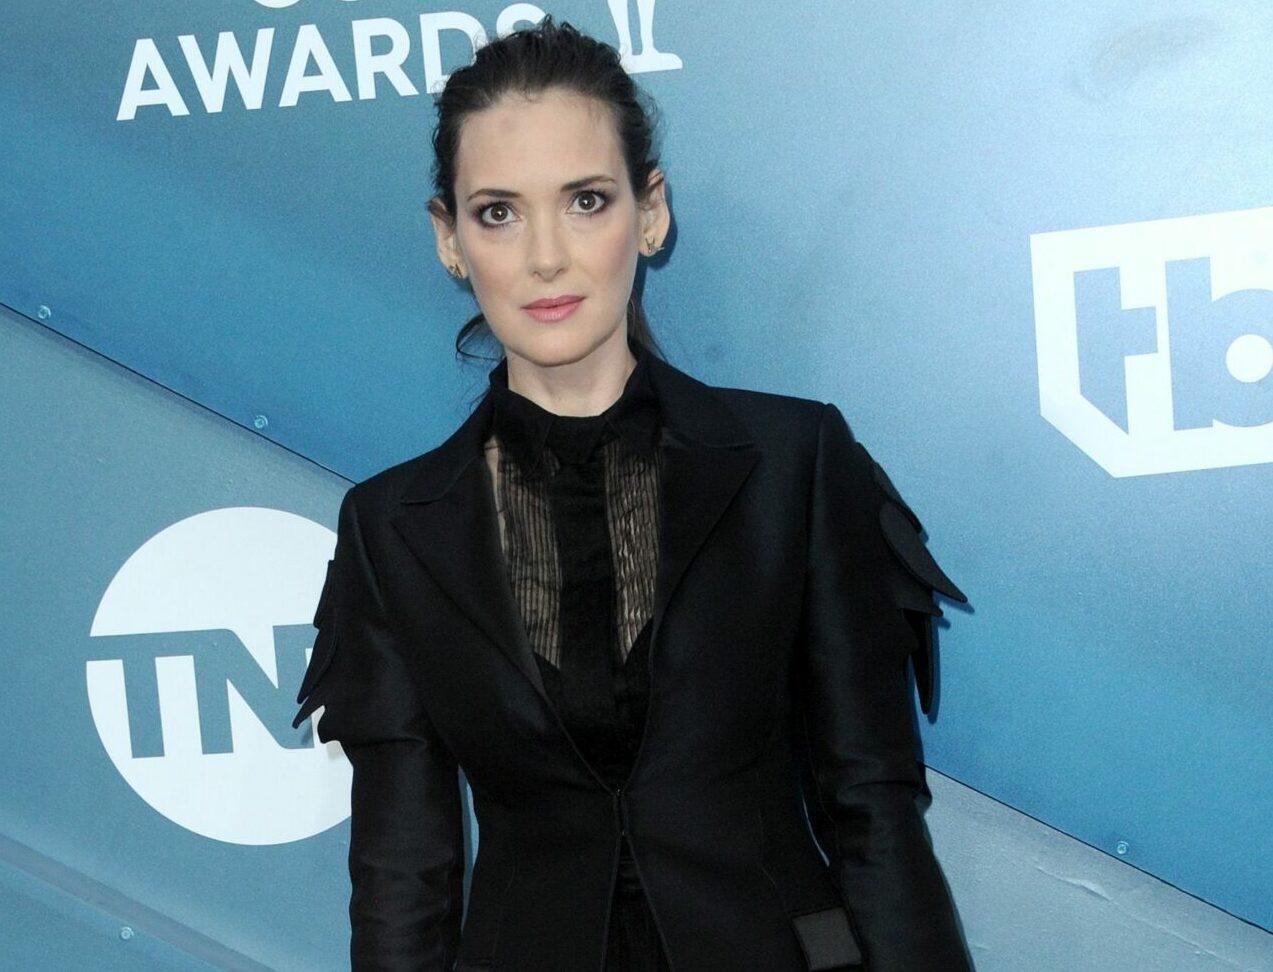 26th Annual Screen Actors Guild Awards held at the Shrine Auditorium in Los Angeles. 19 Jan 2020 Pictured: Winona Ryder.